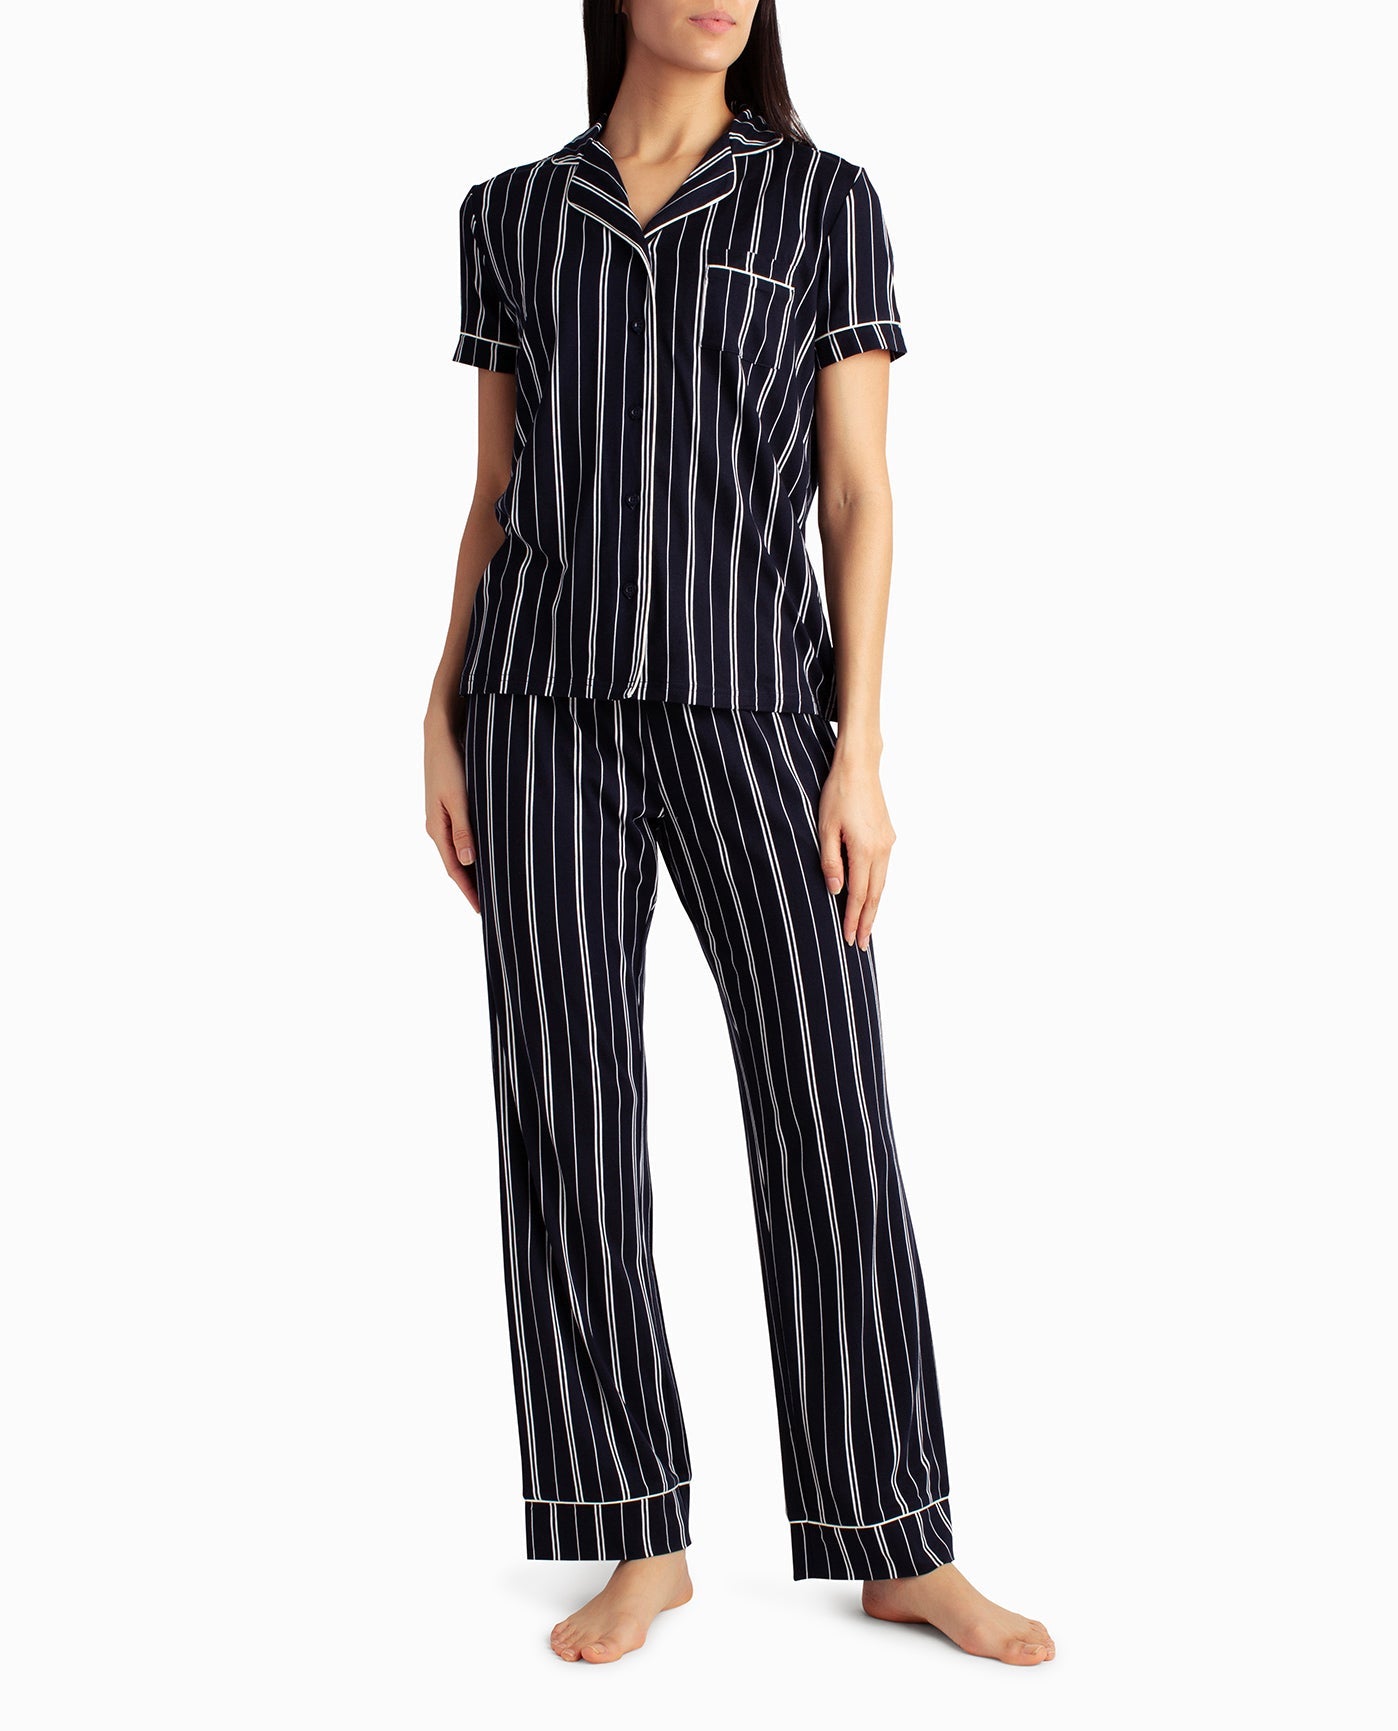 FRONT OF PEACHED JERSEY SHIRT AND PANT TWO-PIECE SLEEPWEAR SET | Stormy Night Vertical Stripe